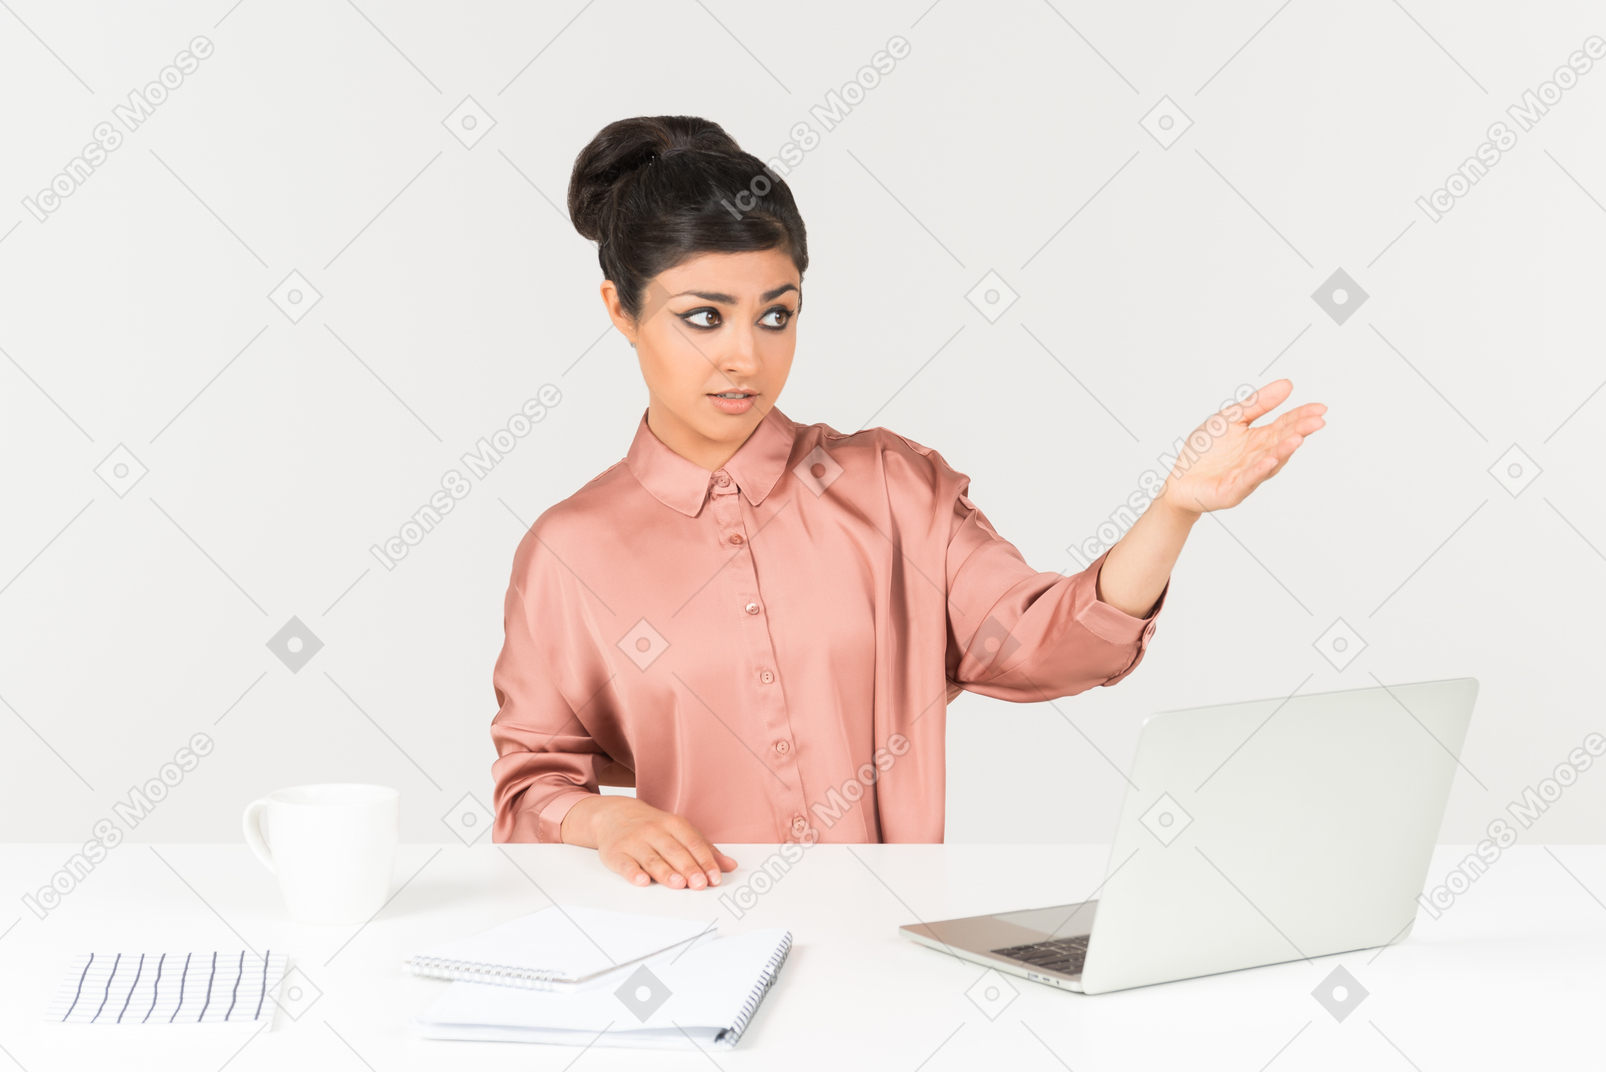 Young indian office worker sitting at the office desk and pointing forward